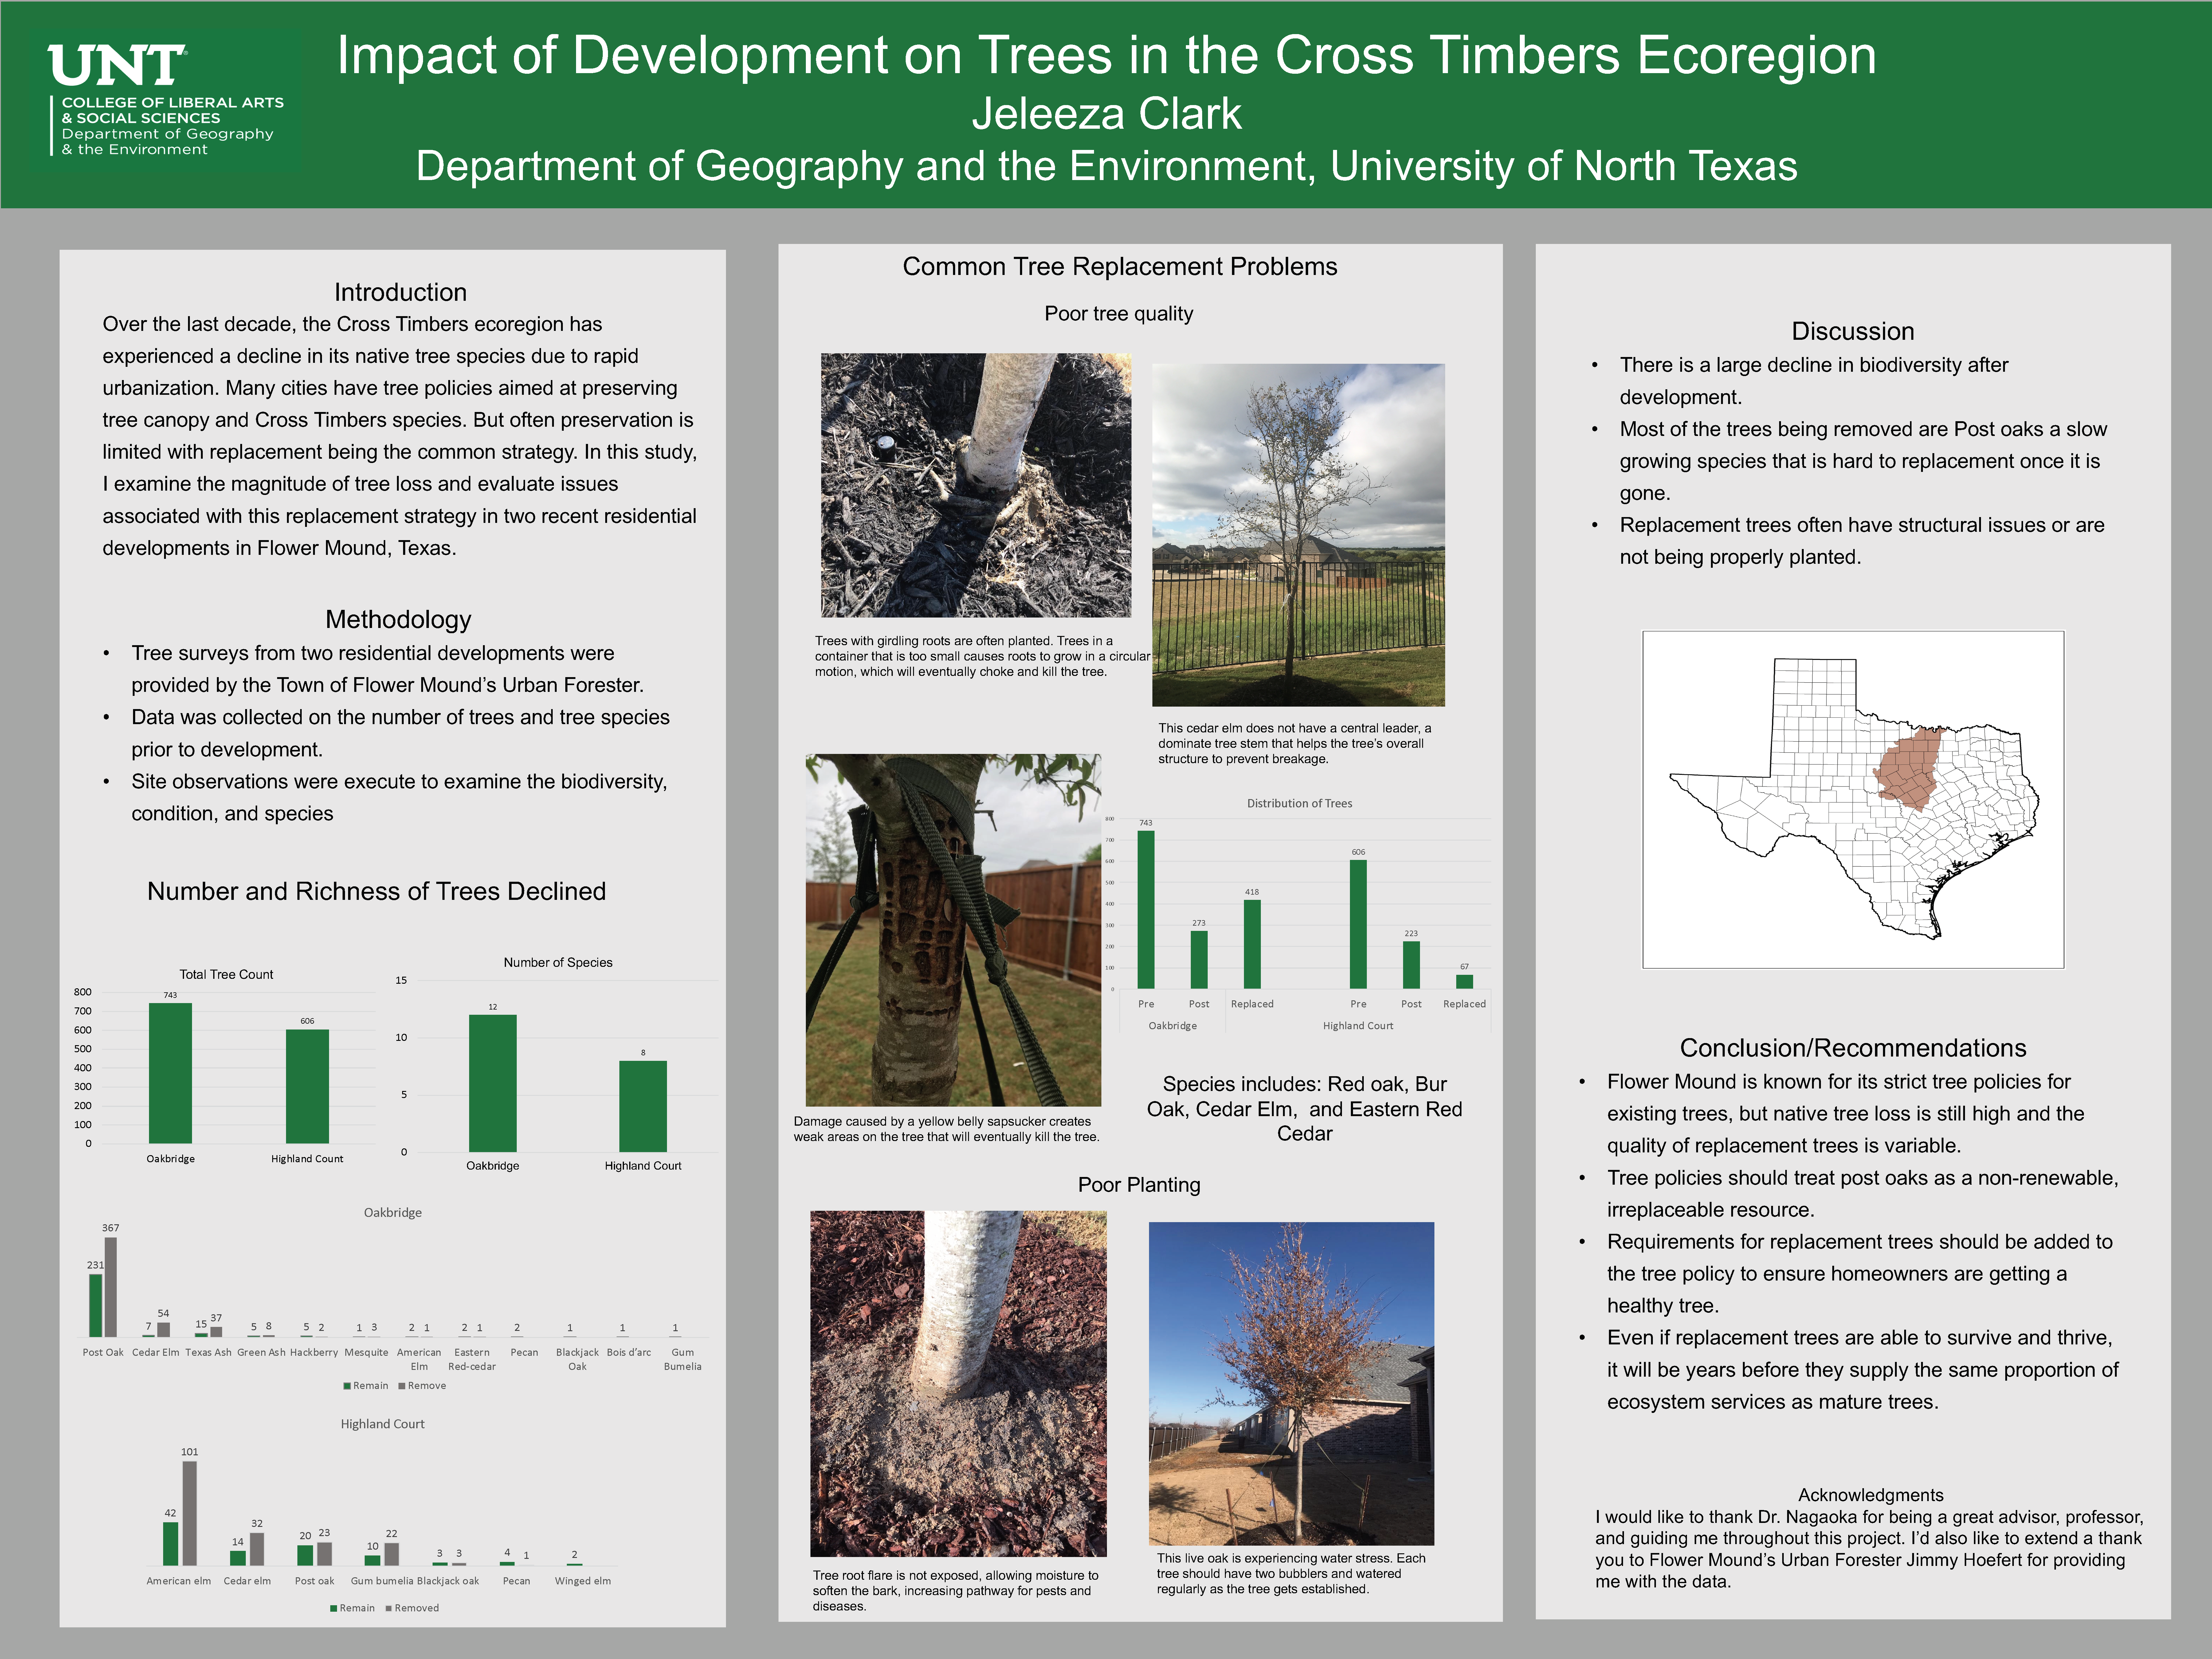 Impact of Development on Trees in the Cross Timbers Ecoregion